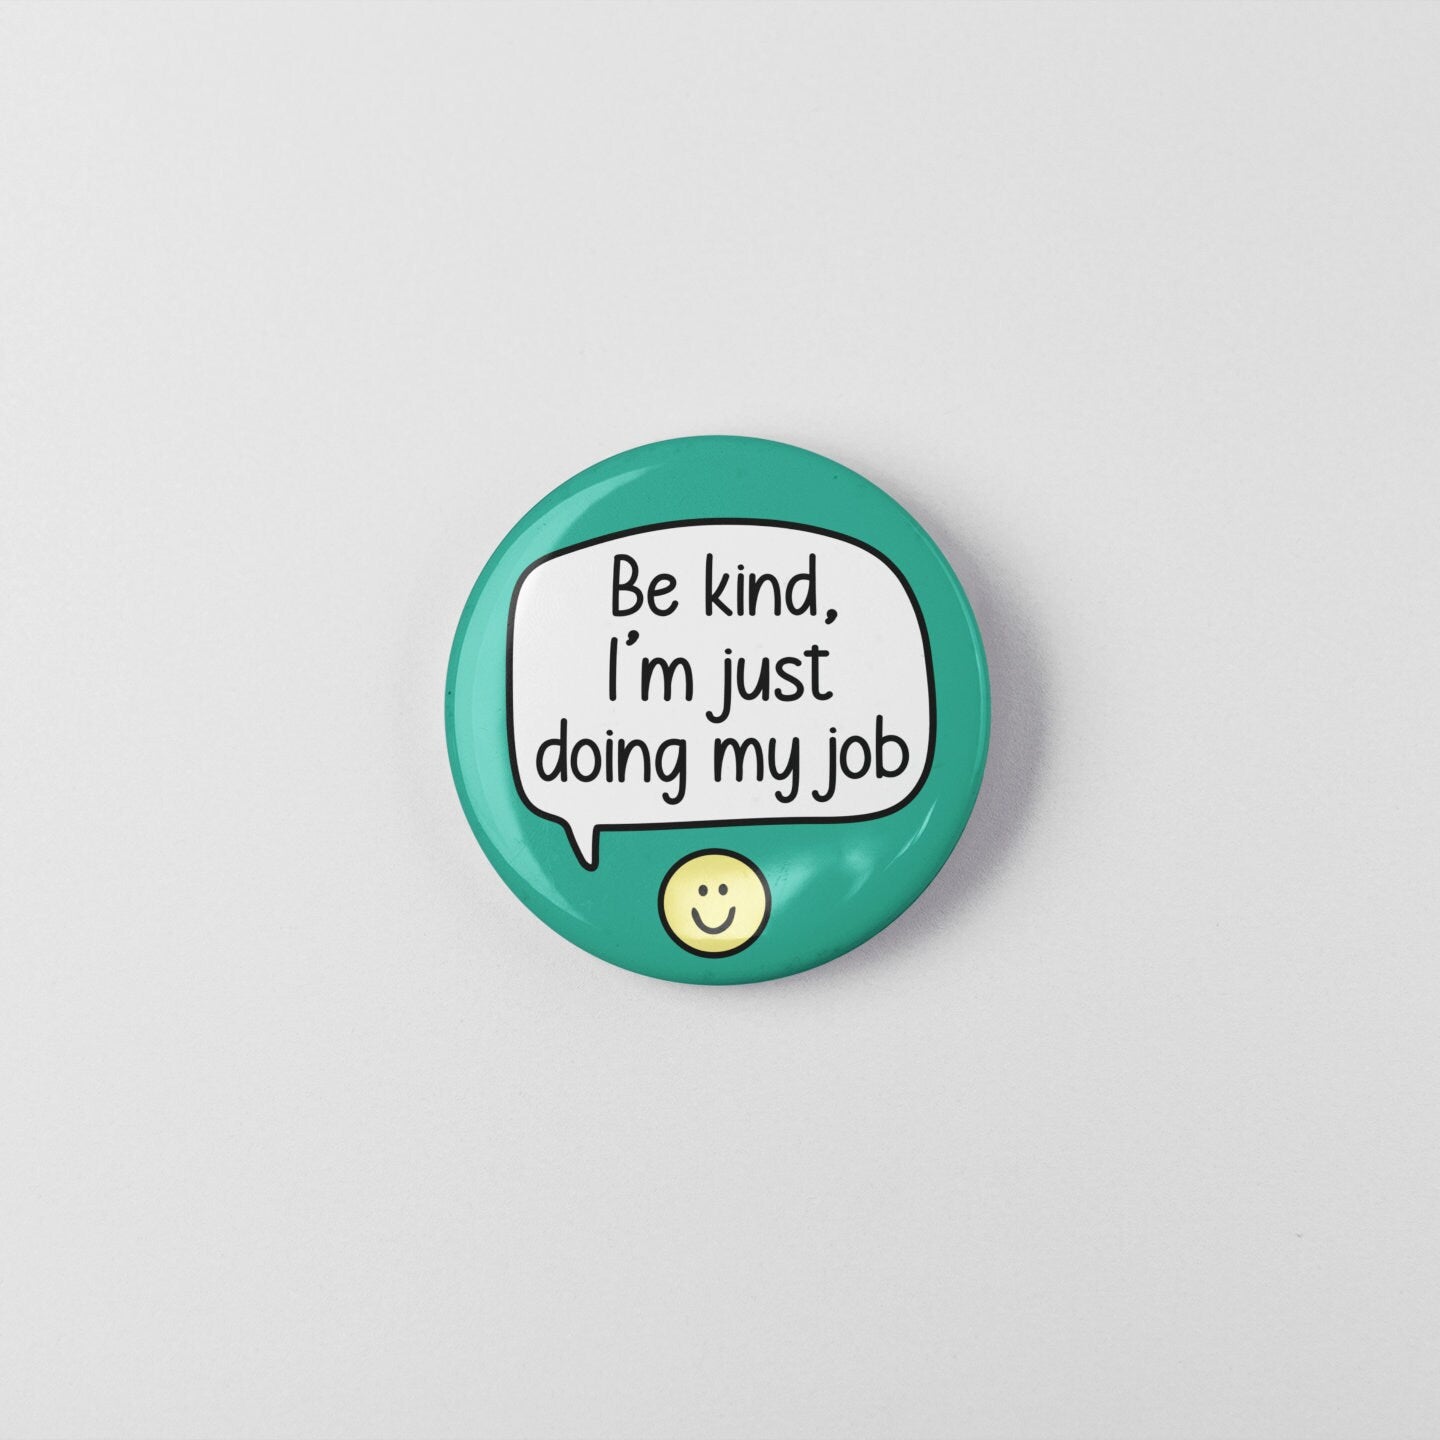 Be Kind, I'm Just Doing My Job - Pin Badge | Colleague Gifts, Worker Pins, Be Nice